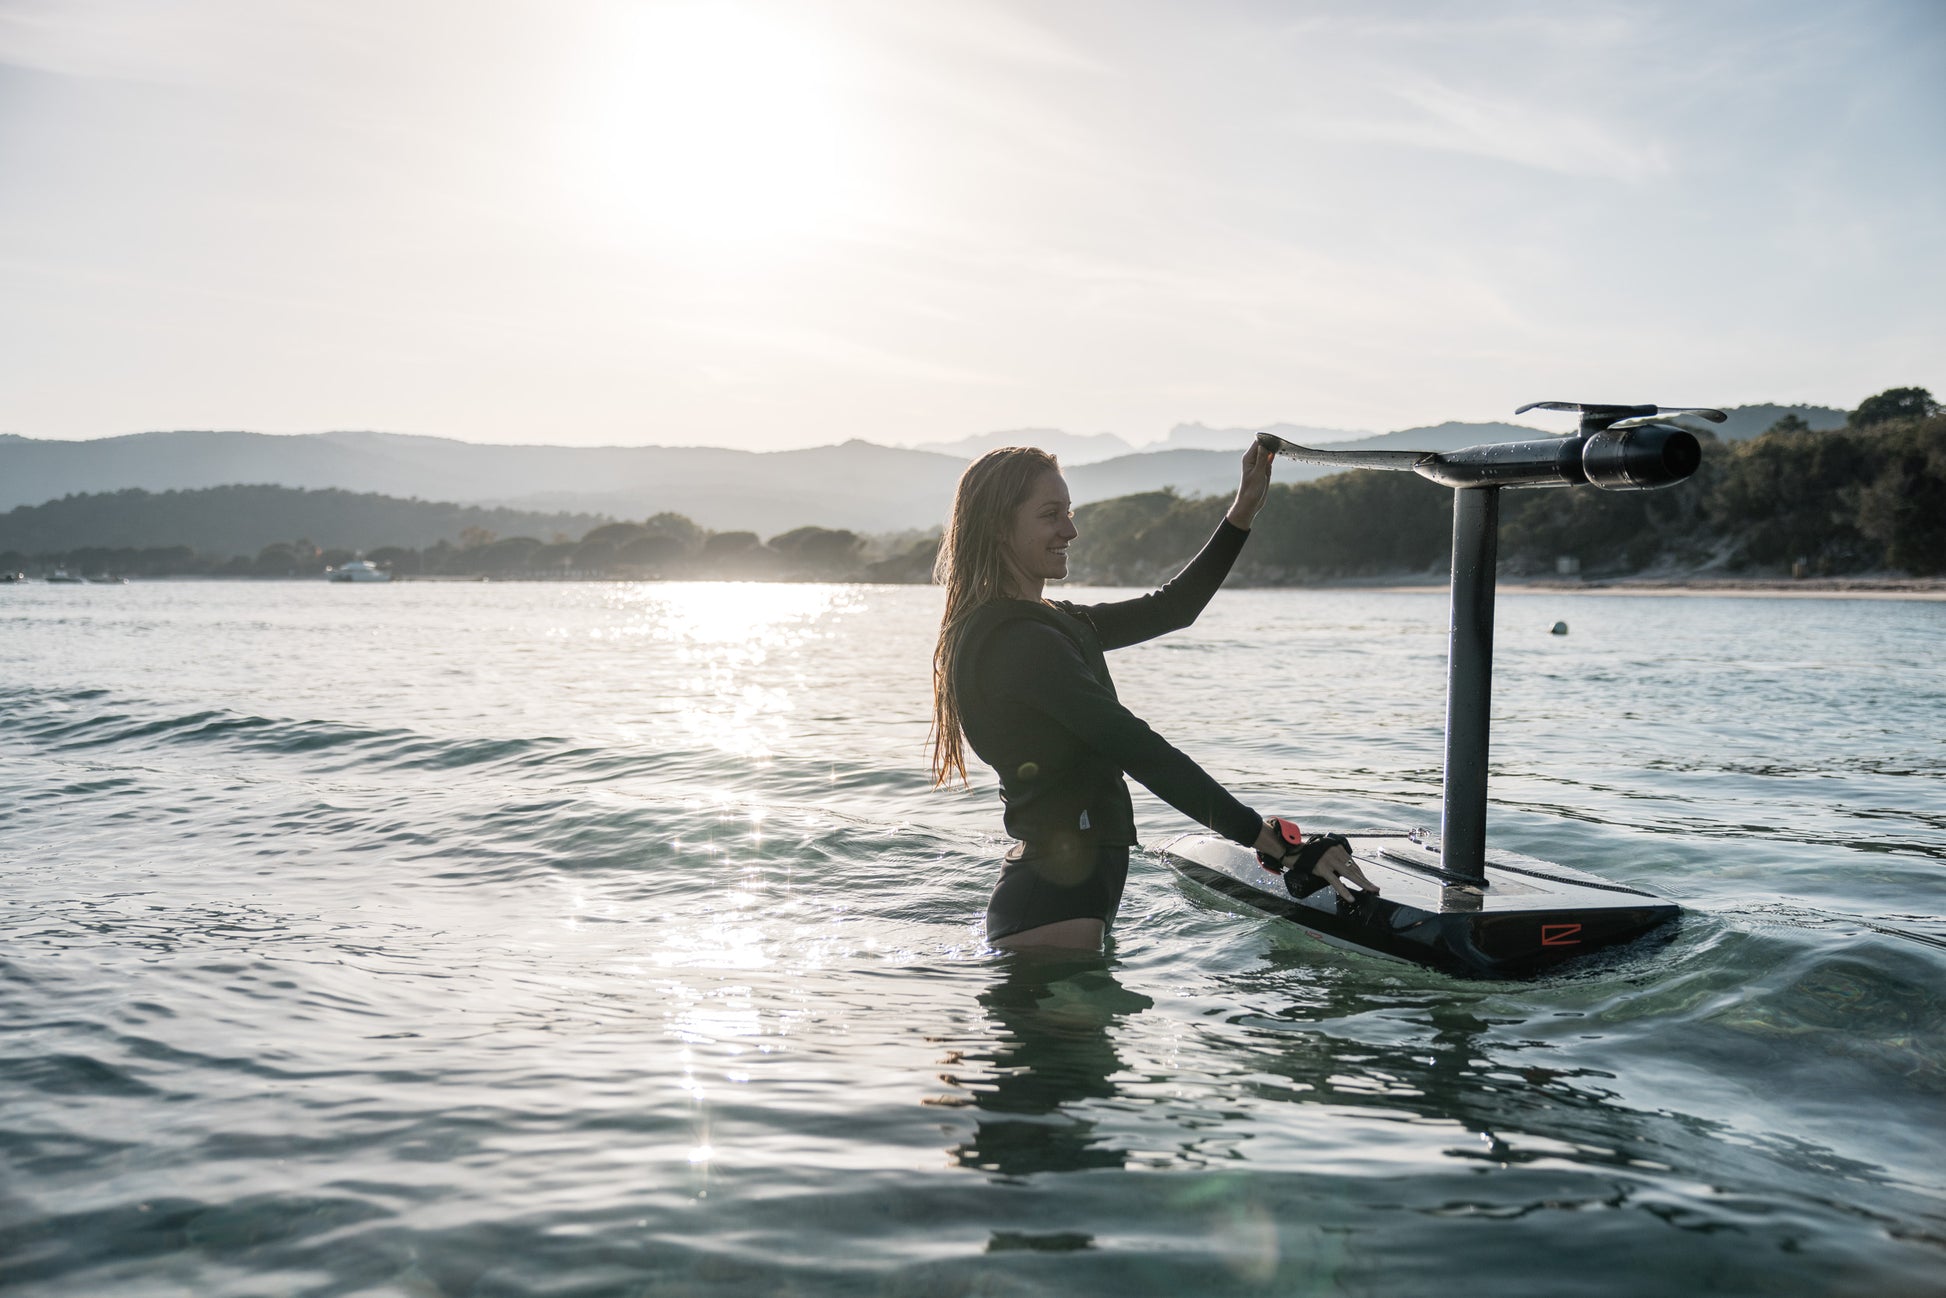 e-boarders-eboarders-awake-impact-safety-vest-harness-floatation-ravik-vinga-footstraps-foot-straps-wireless-hand-controller-remote-battery-charger-powerkey-jetboard-efoil-standard-range-extended-range-watersports-water-sports-electric-wakeboard-surfboard-ejetboard-efoil-ewakeboard-epaddleboard-eboard-woman-in-water-safety-vest-efoil